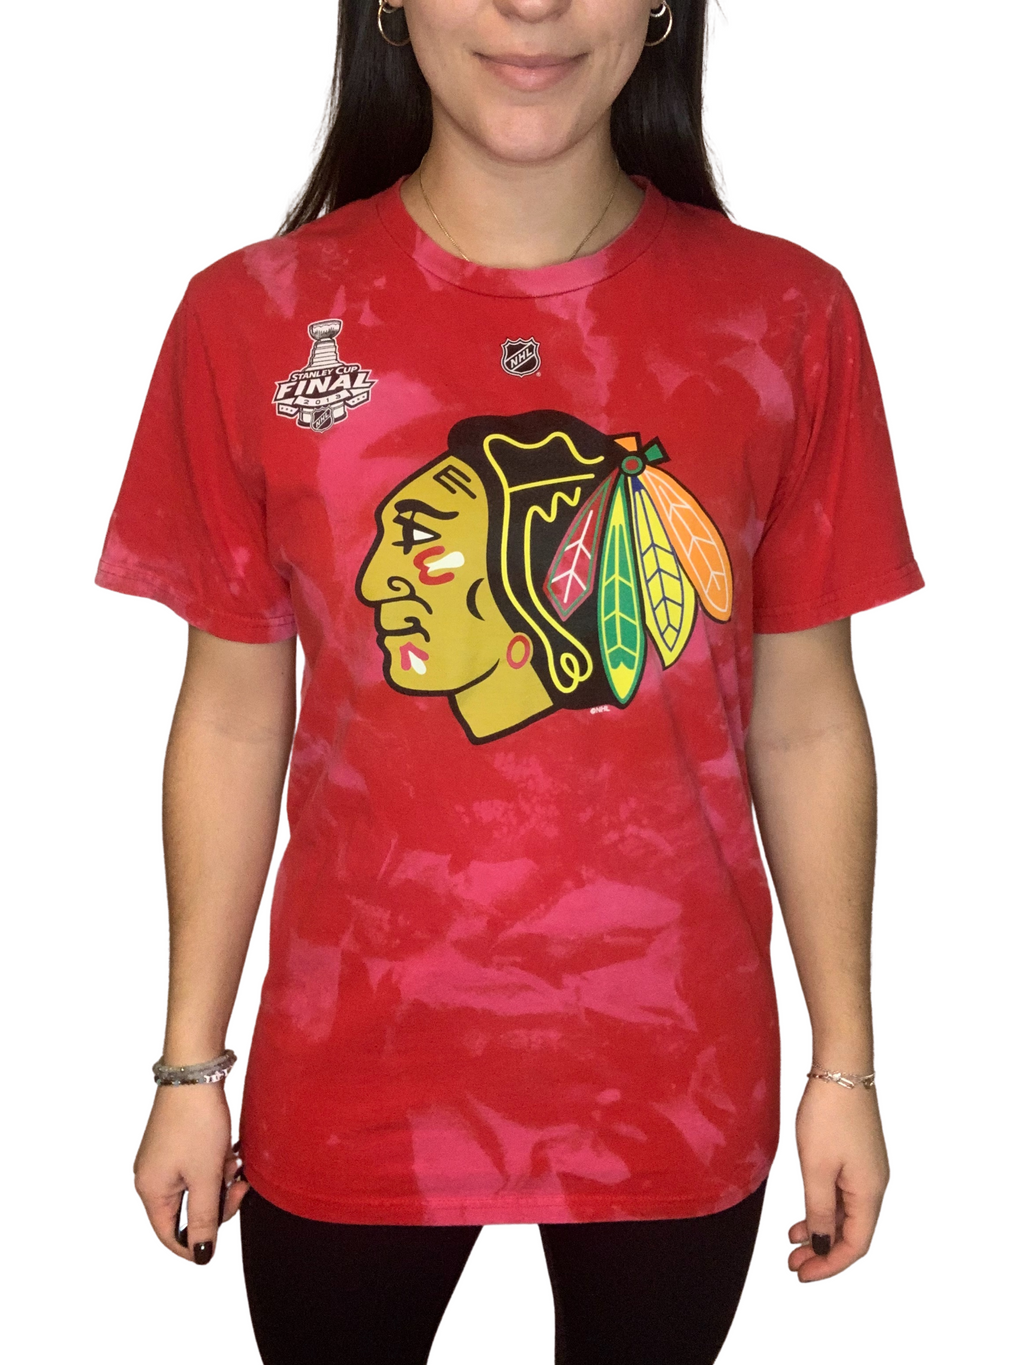 Chicago Blackhawks 2013 Stanley Cup Champions Patrick Kane Bleached Shirt